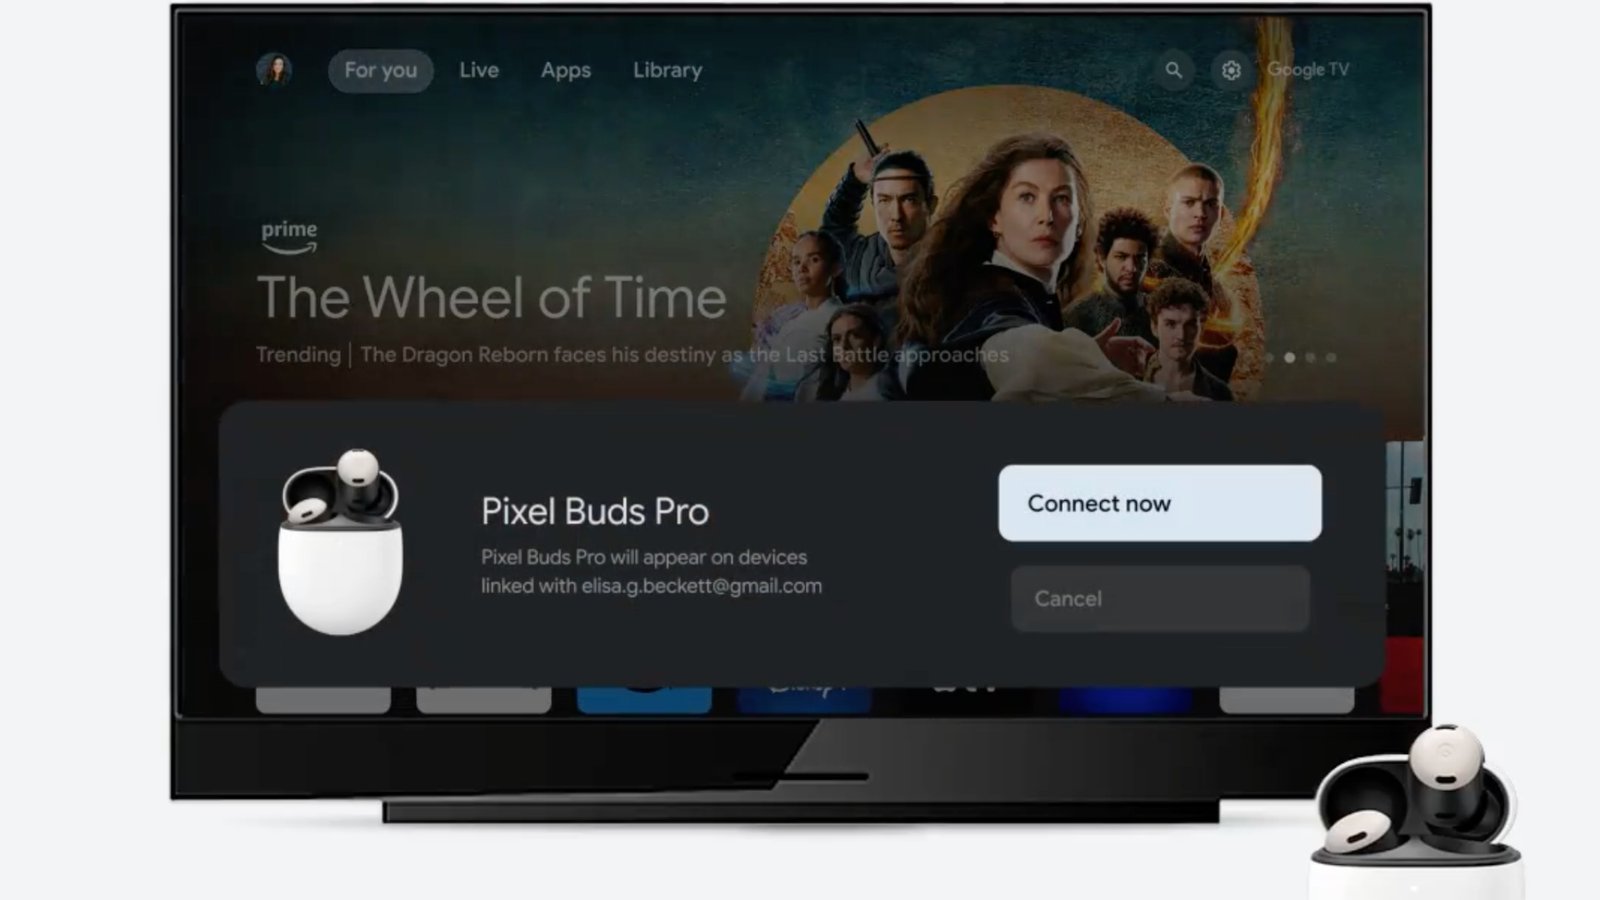 Fast Pair is rolling out widely to more Google TV devices –